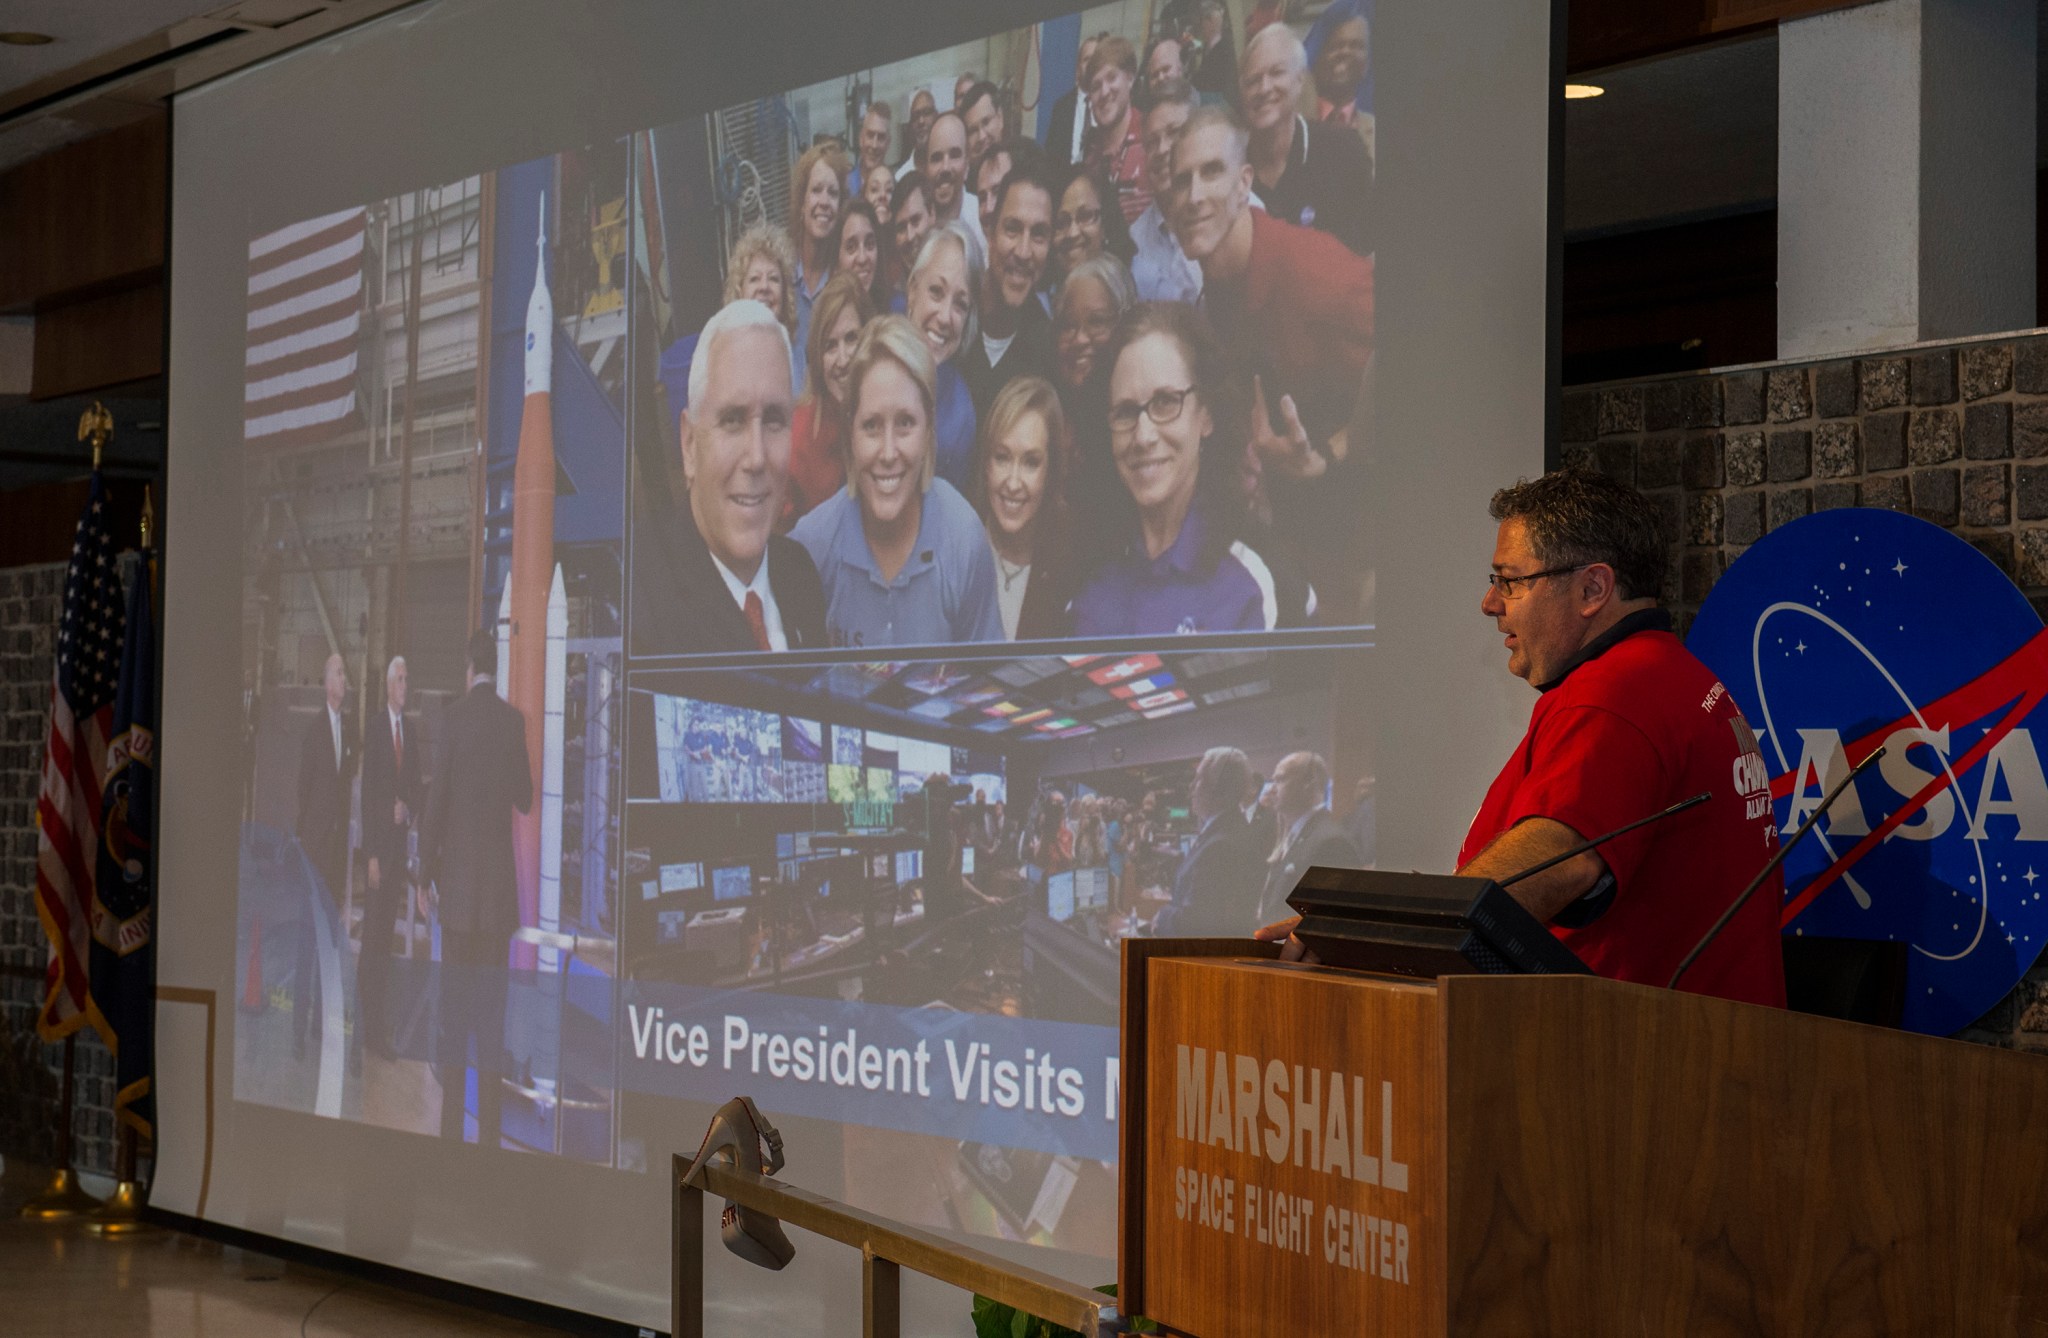 NASA Marshall Space Flight Center Director Todd May highlights some of the key moments from Vice President Mike Pence's visit.